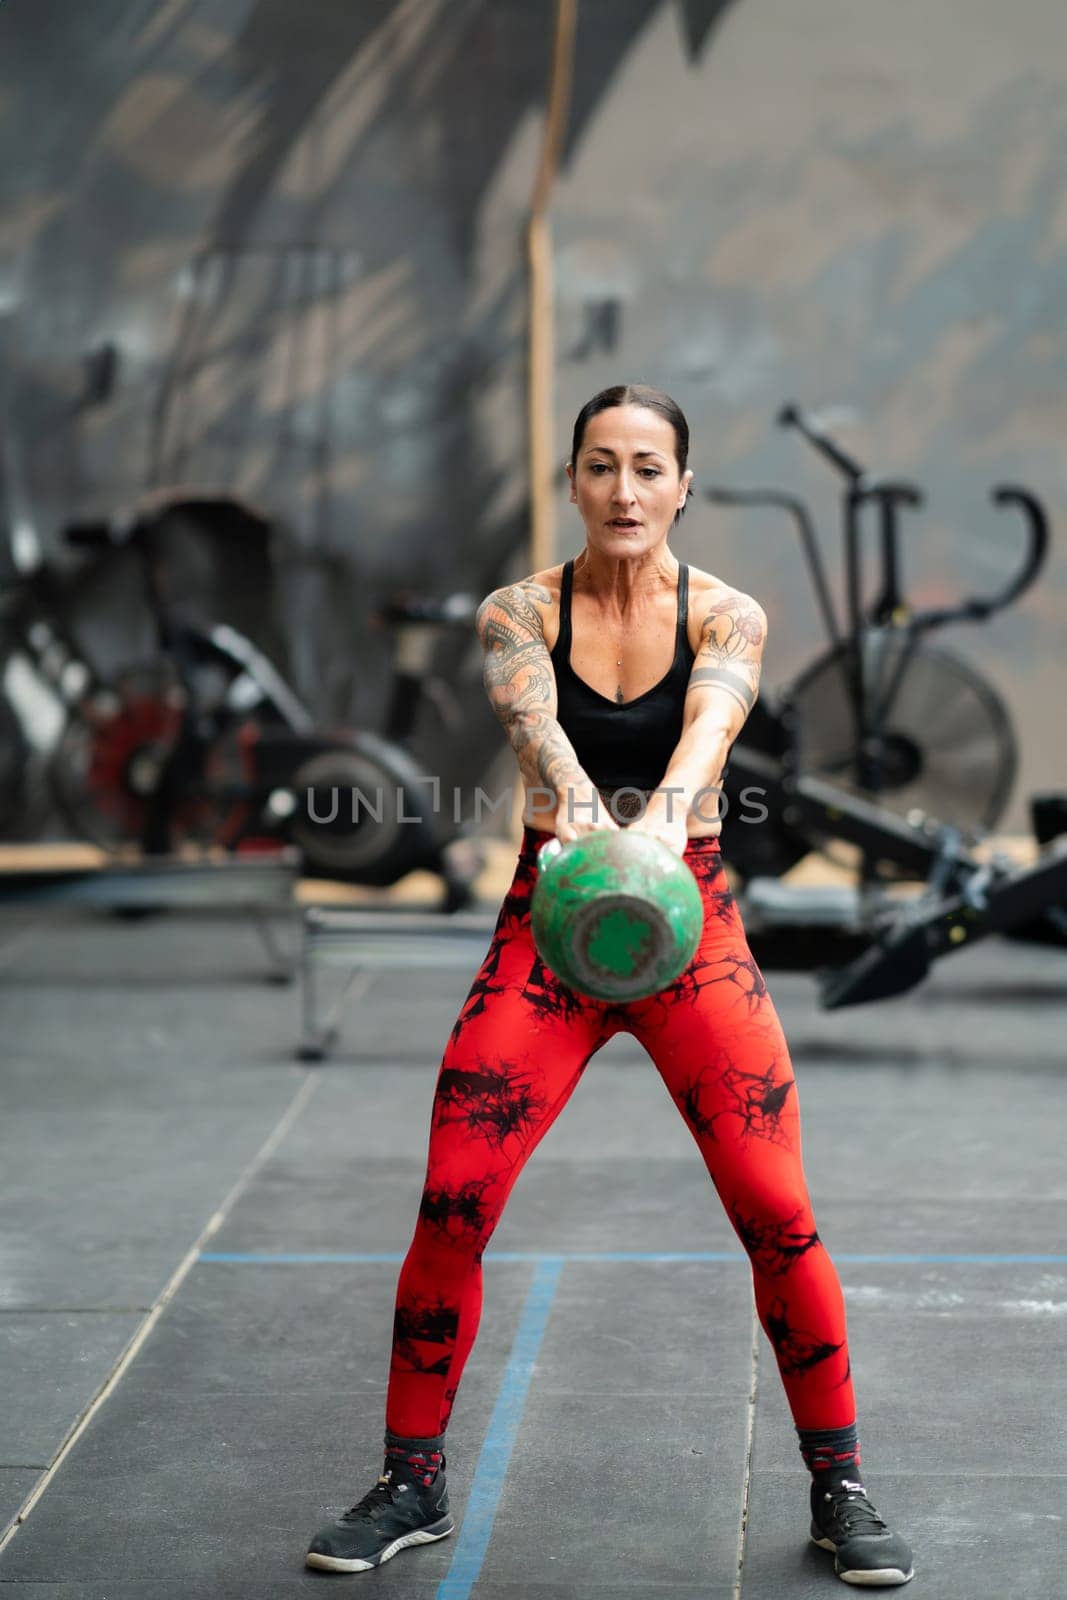 Woman performing kettlebell swing exercise in a gym by javiindy